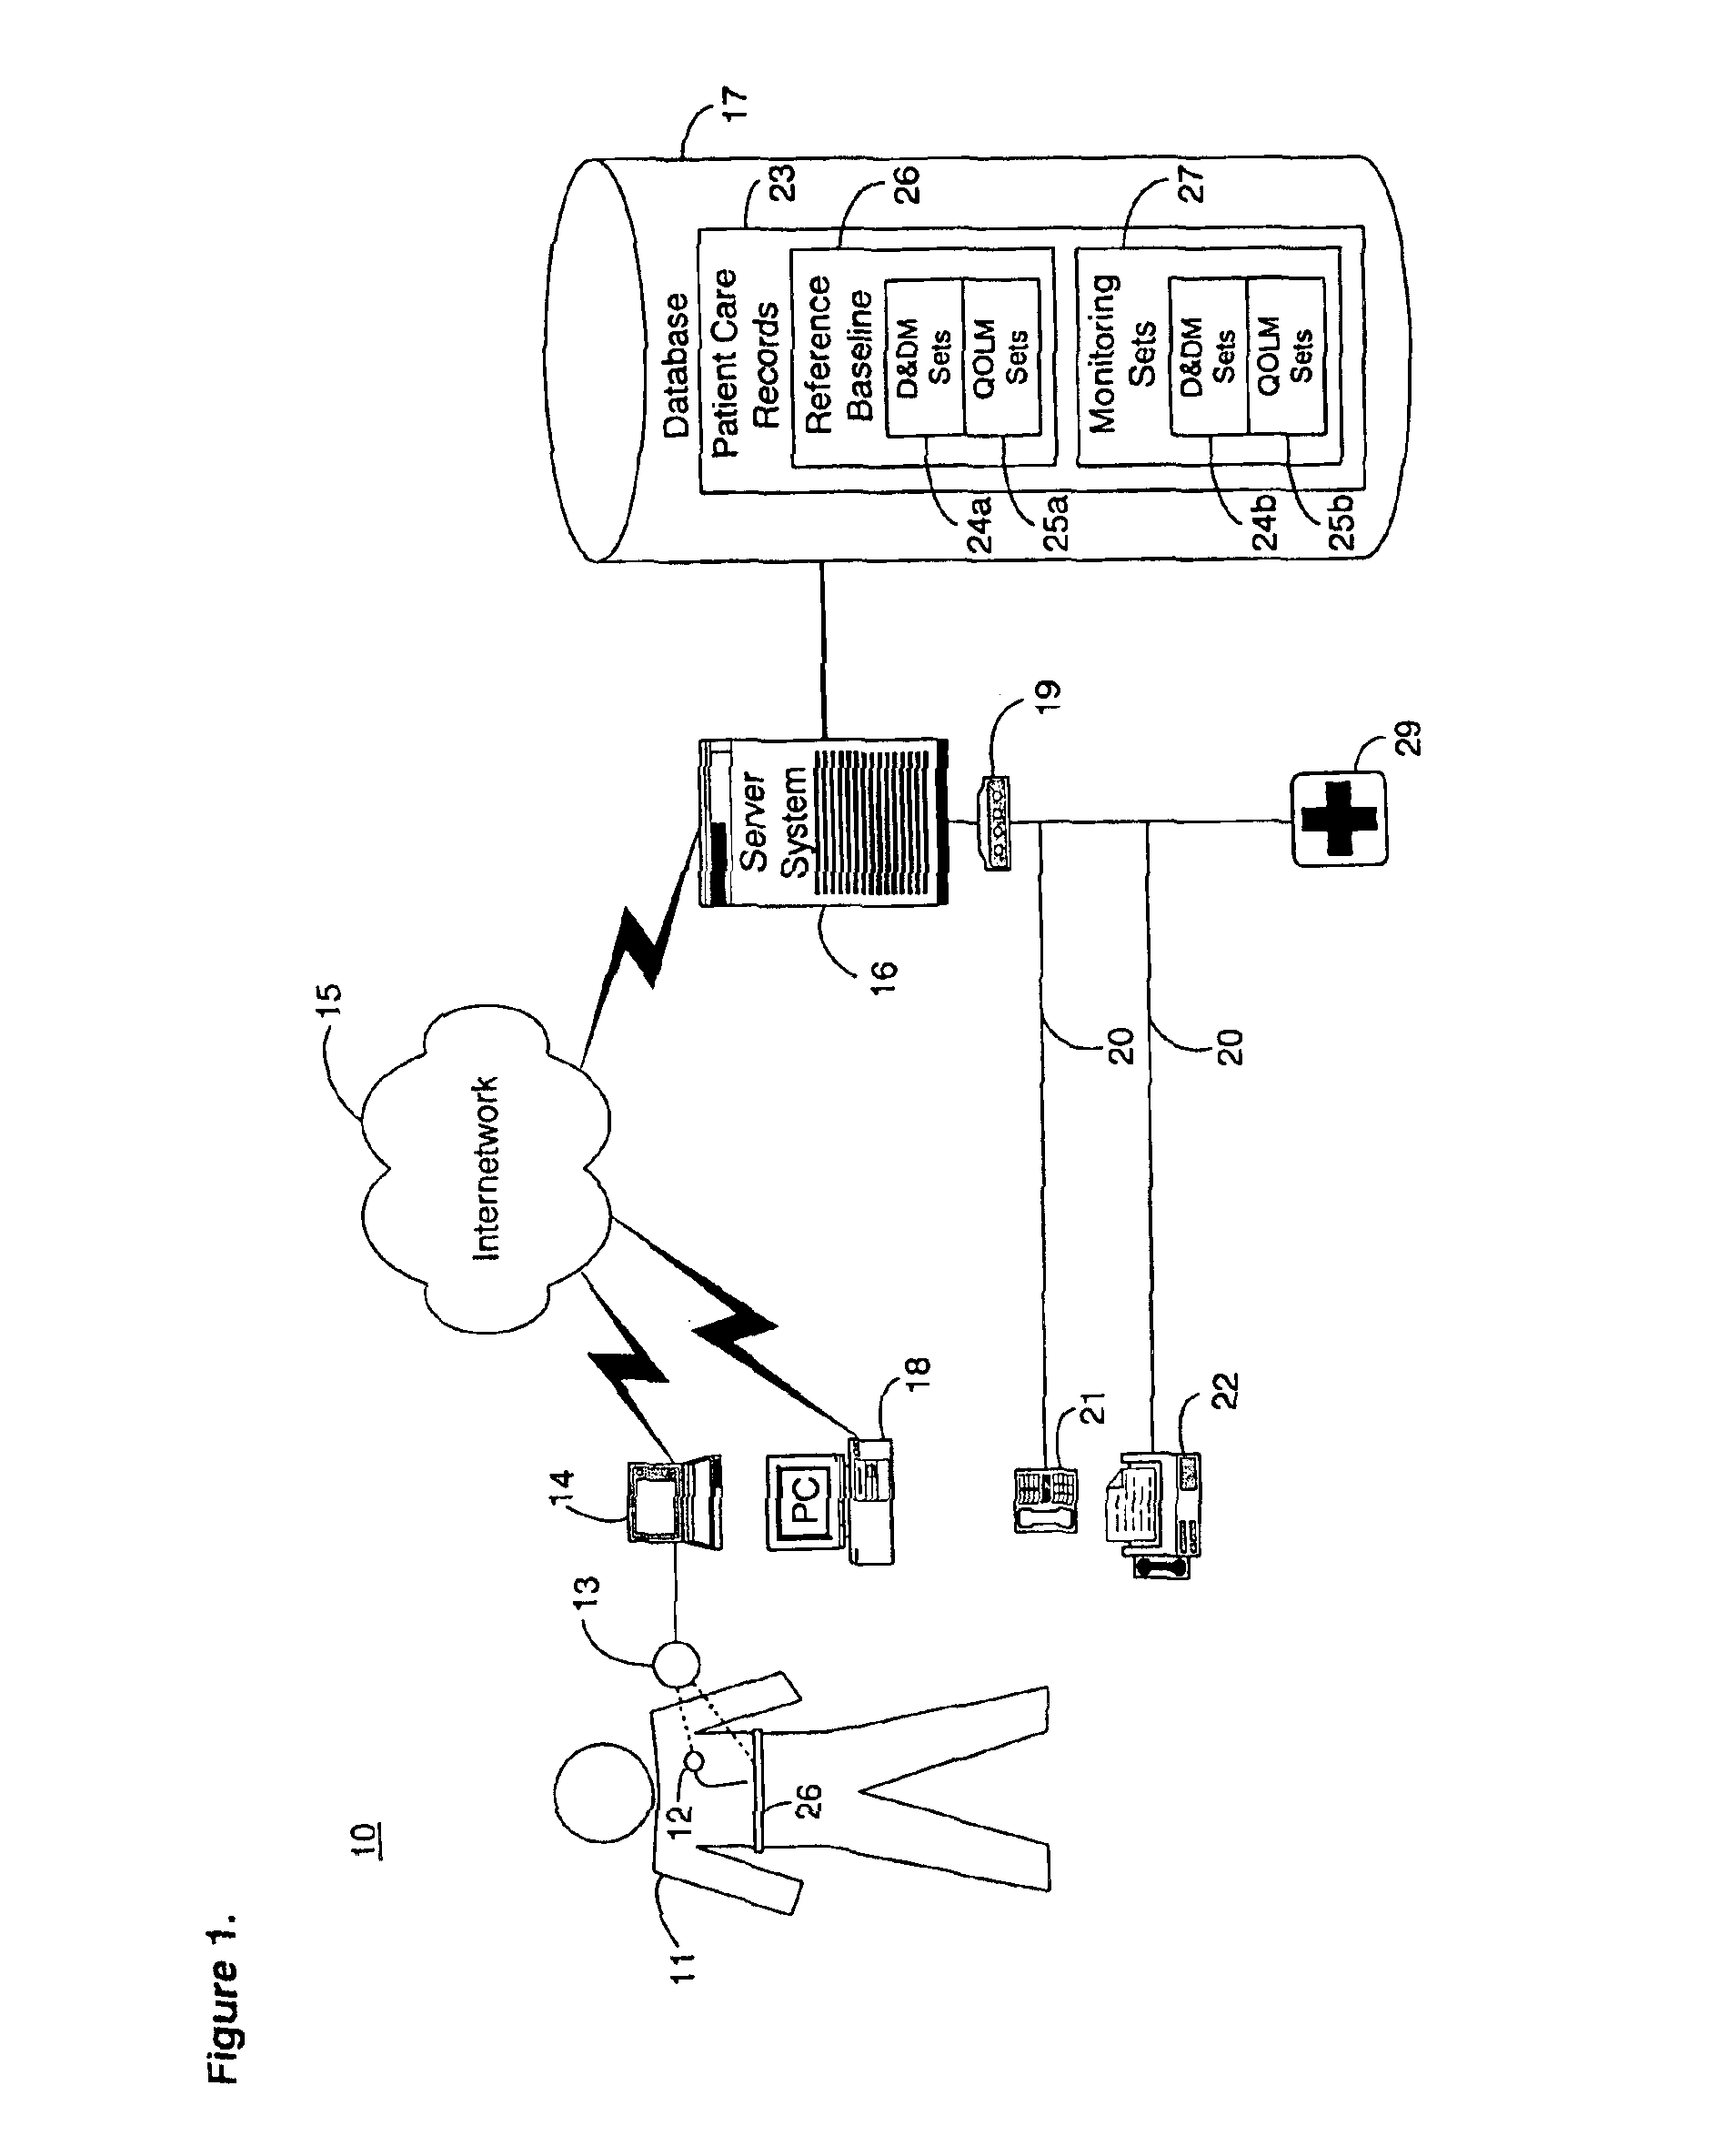 System and method for ordering and prioritizing multiple health disorders for automated remote patient care